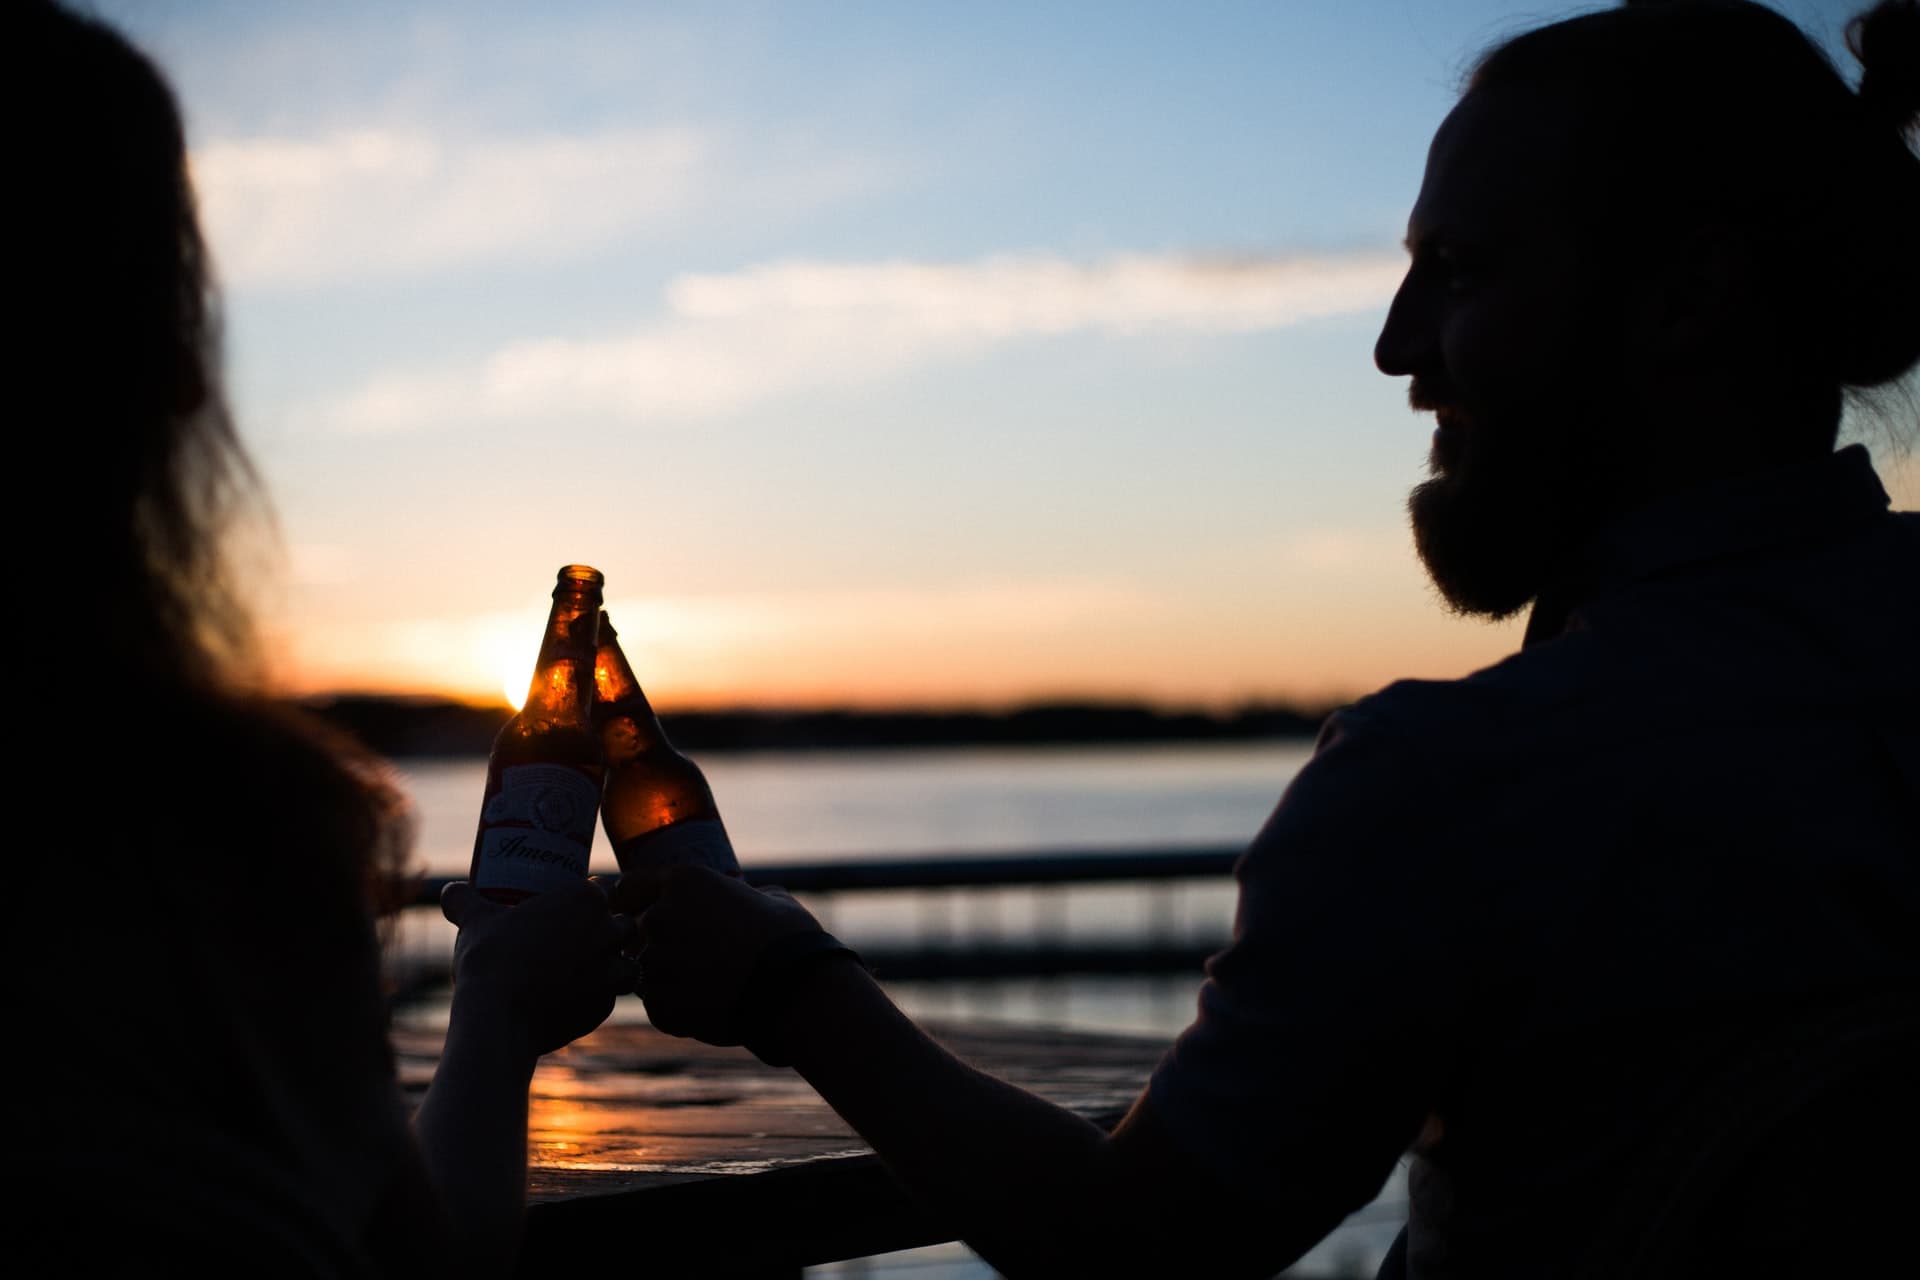 A man and woman having a glass of beer in the sunset